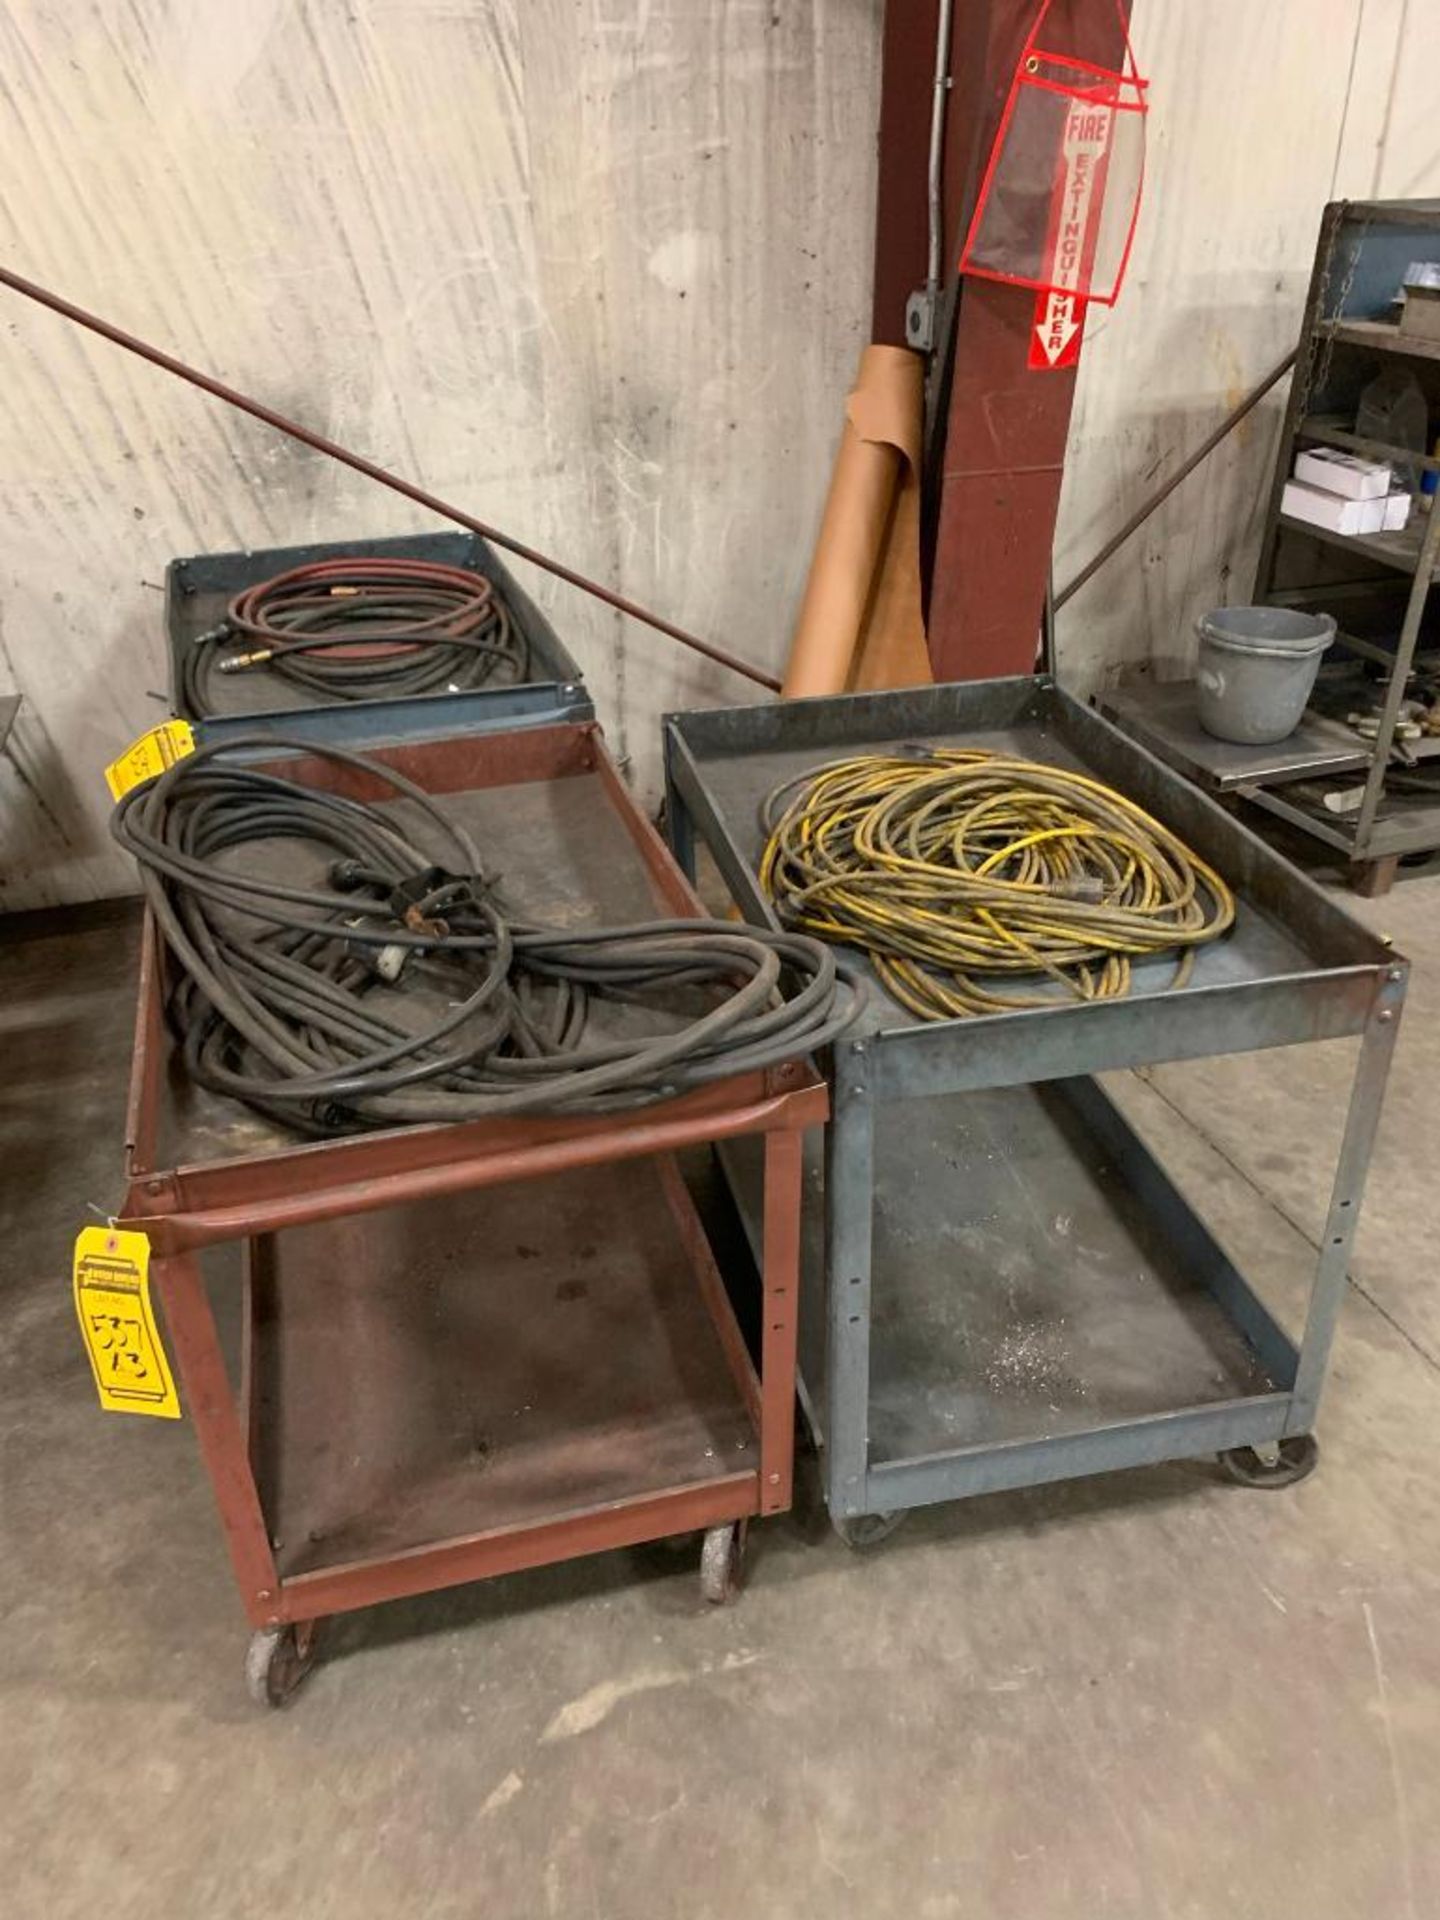 (3) CART W/ ELECTRICAL CORD, GROUND CABLE, AIR HOSE